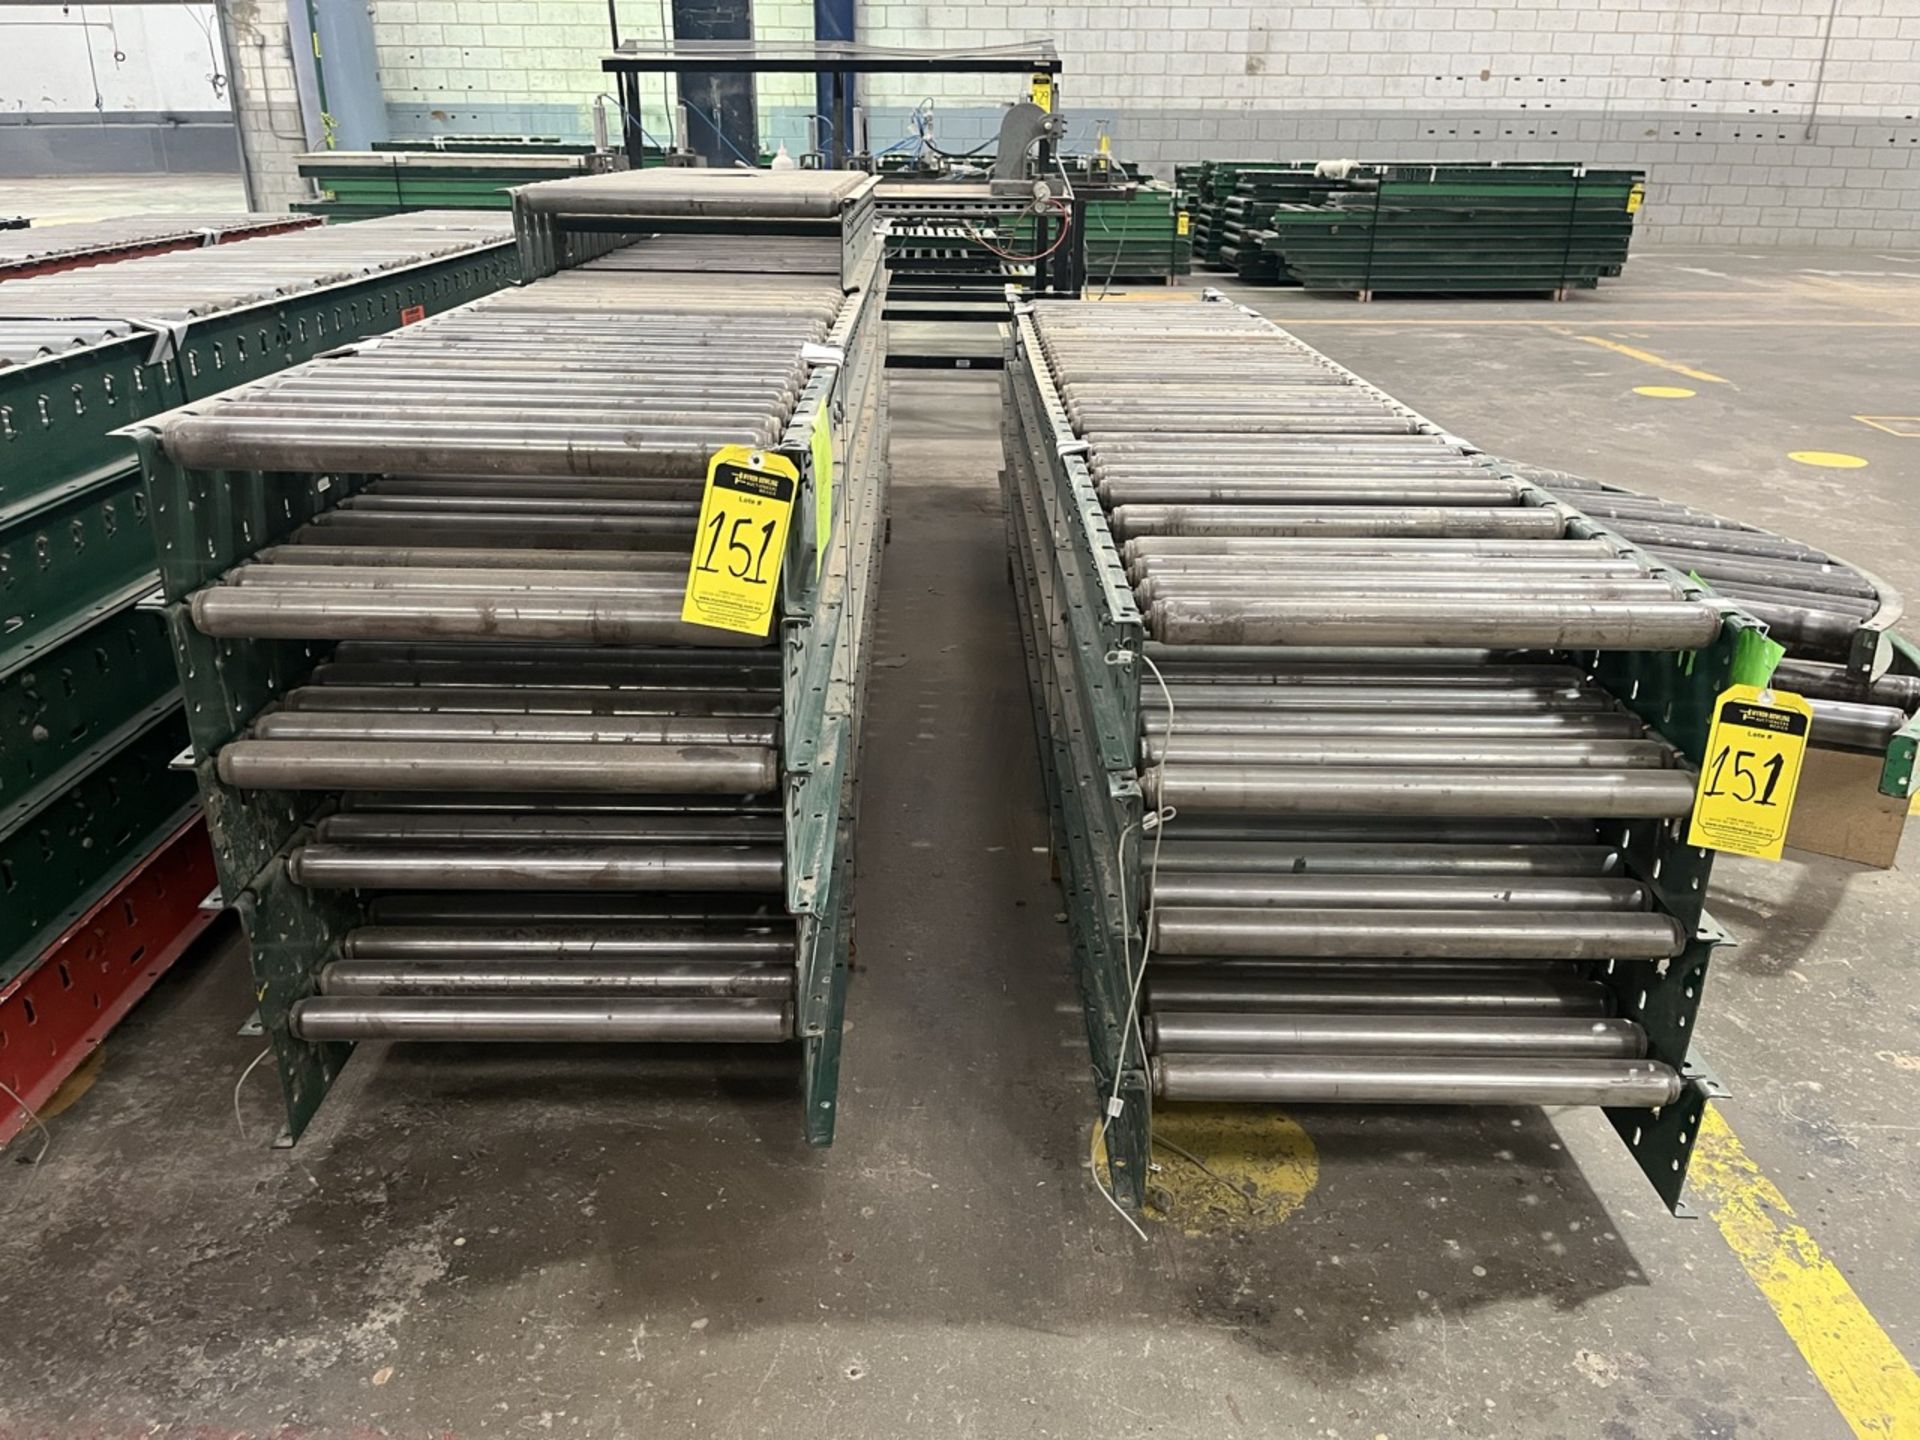 10 pieces of roller conveyor belt measuring approx. 62 cm wide by different lengths; includes 2 cur